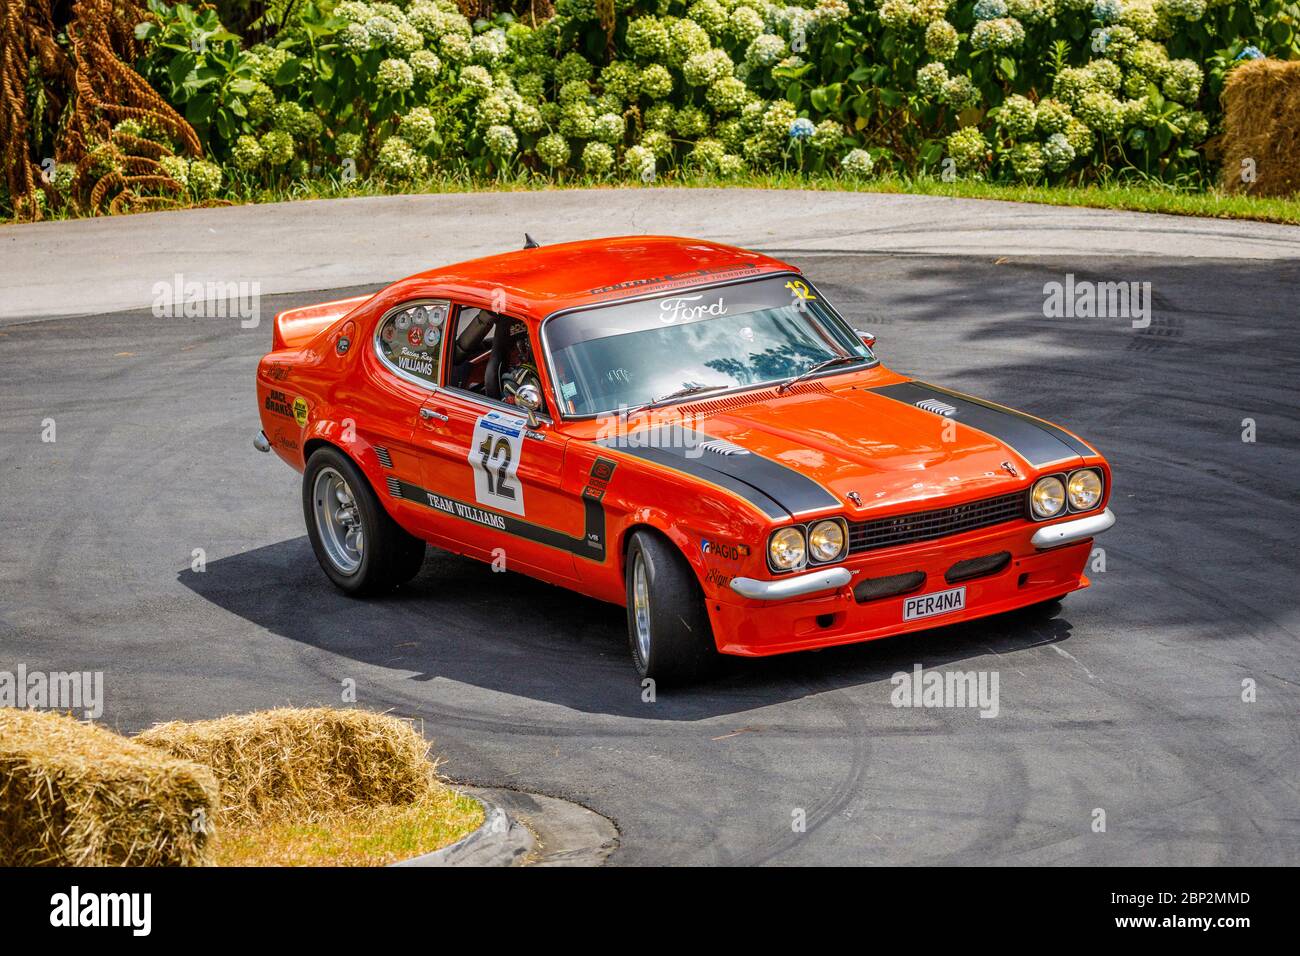 1970 Ford Capri Perana V8 with driver Racing Ray Williams. Engine is a Ford Winsor V8 giving 460hp. Stock Photo